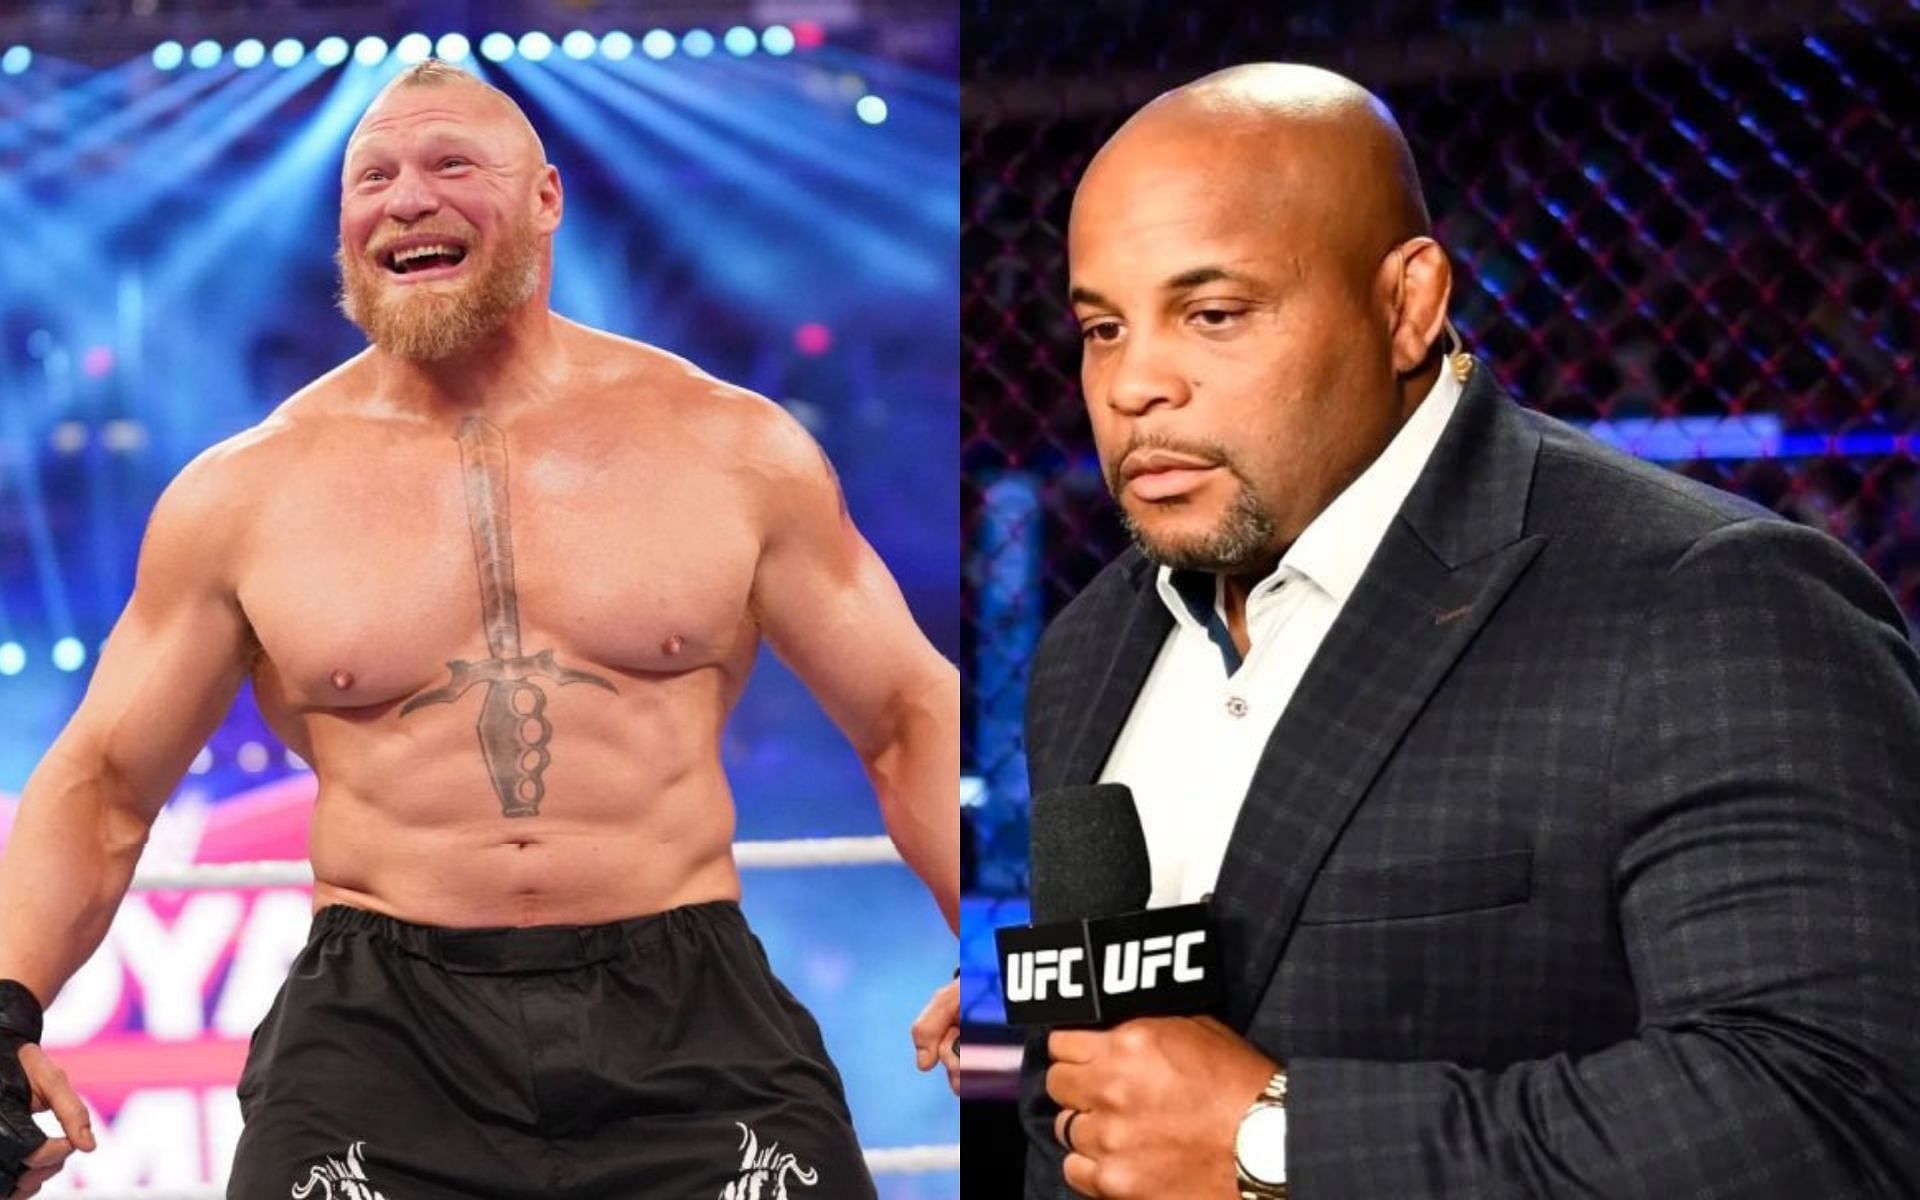 Brock Lesnar [Left] Daniel Cormier [Right] [Images courtesy: @mma_orbit and @WrestlePurists (Twitter)]